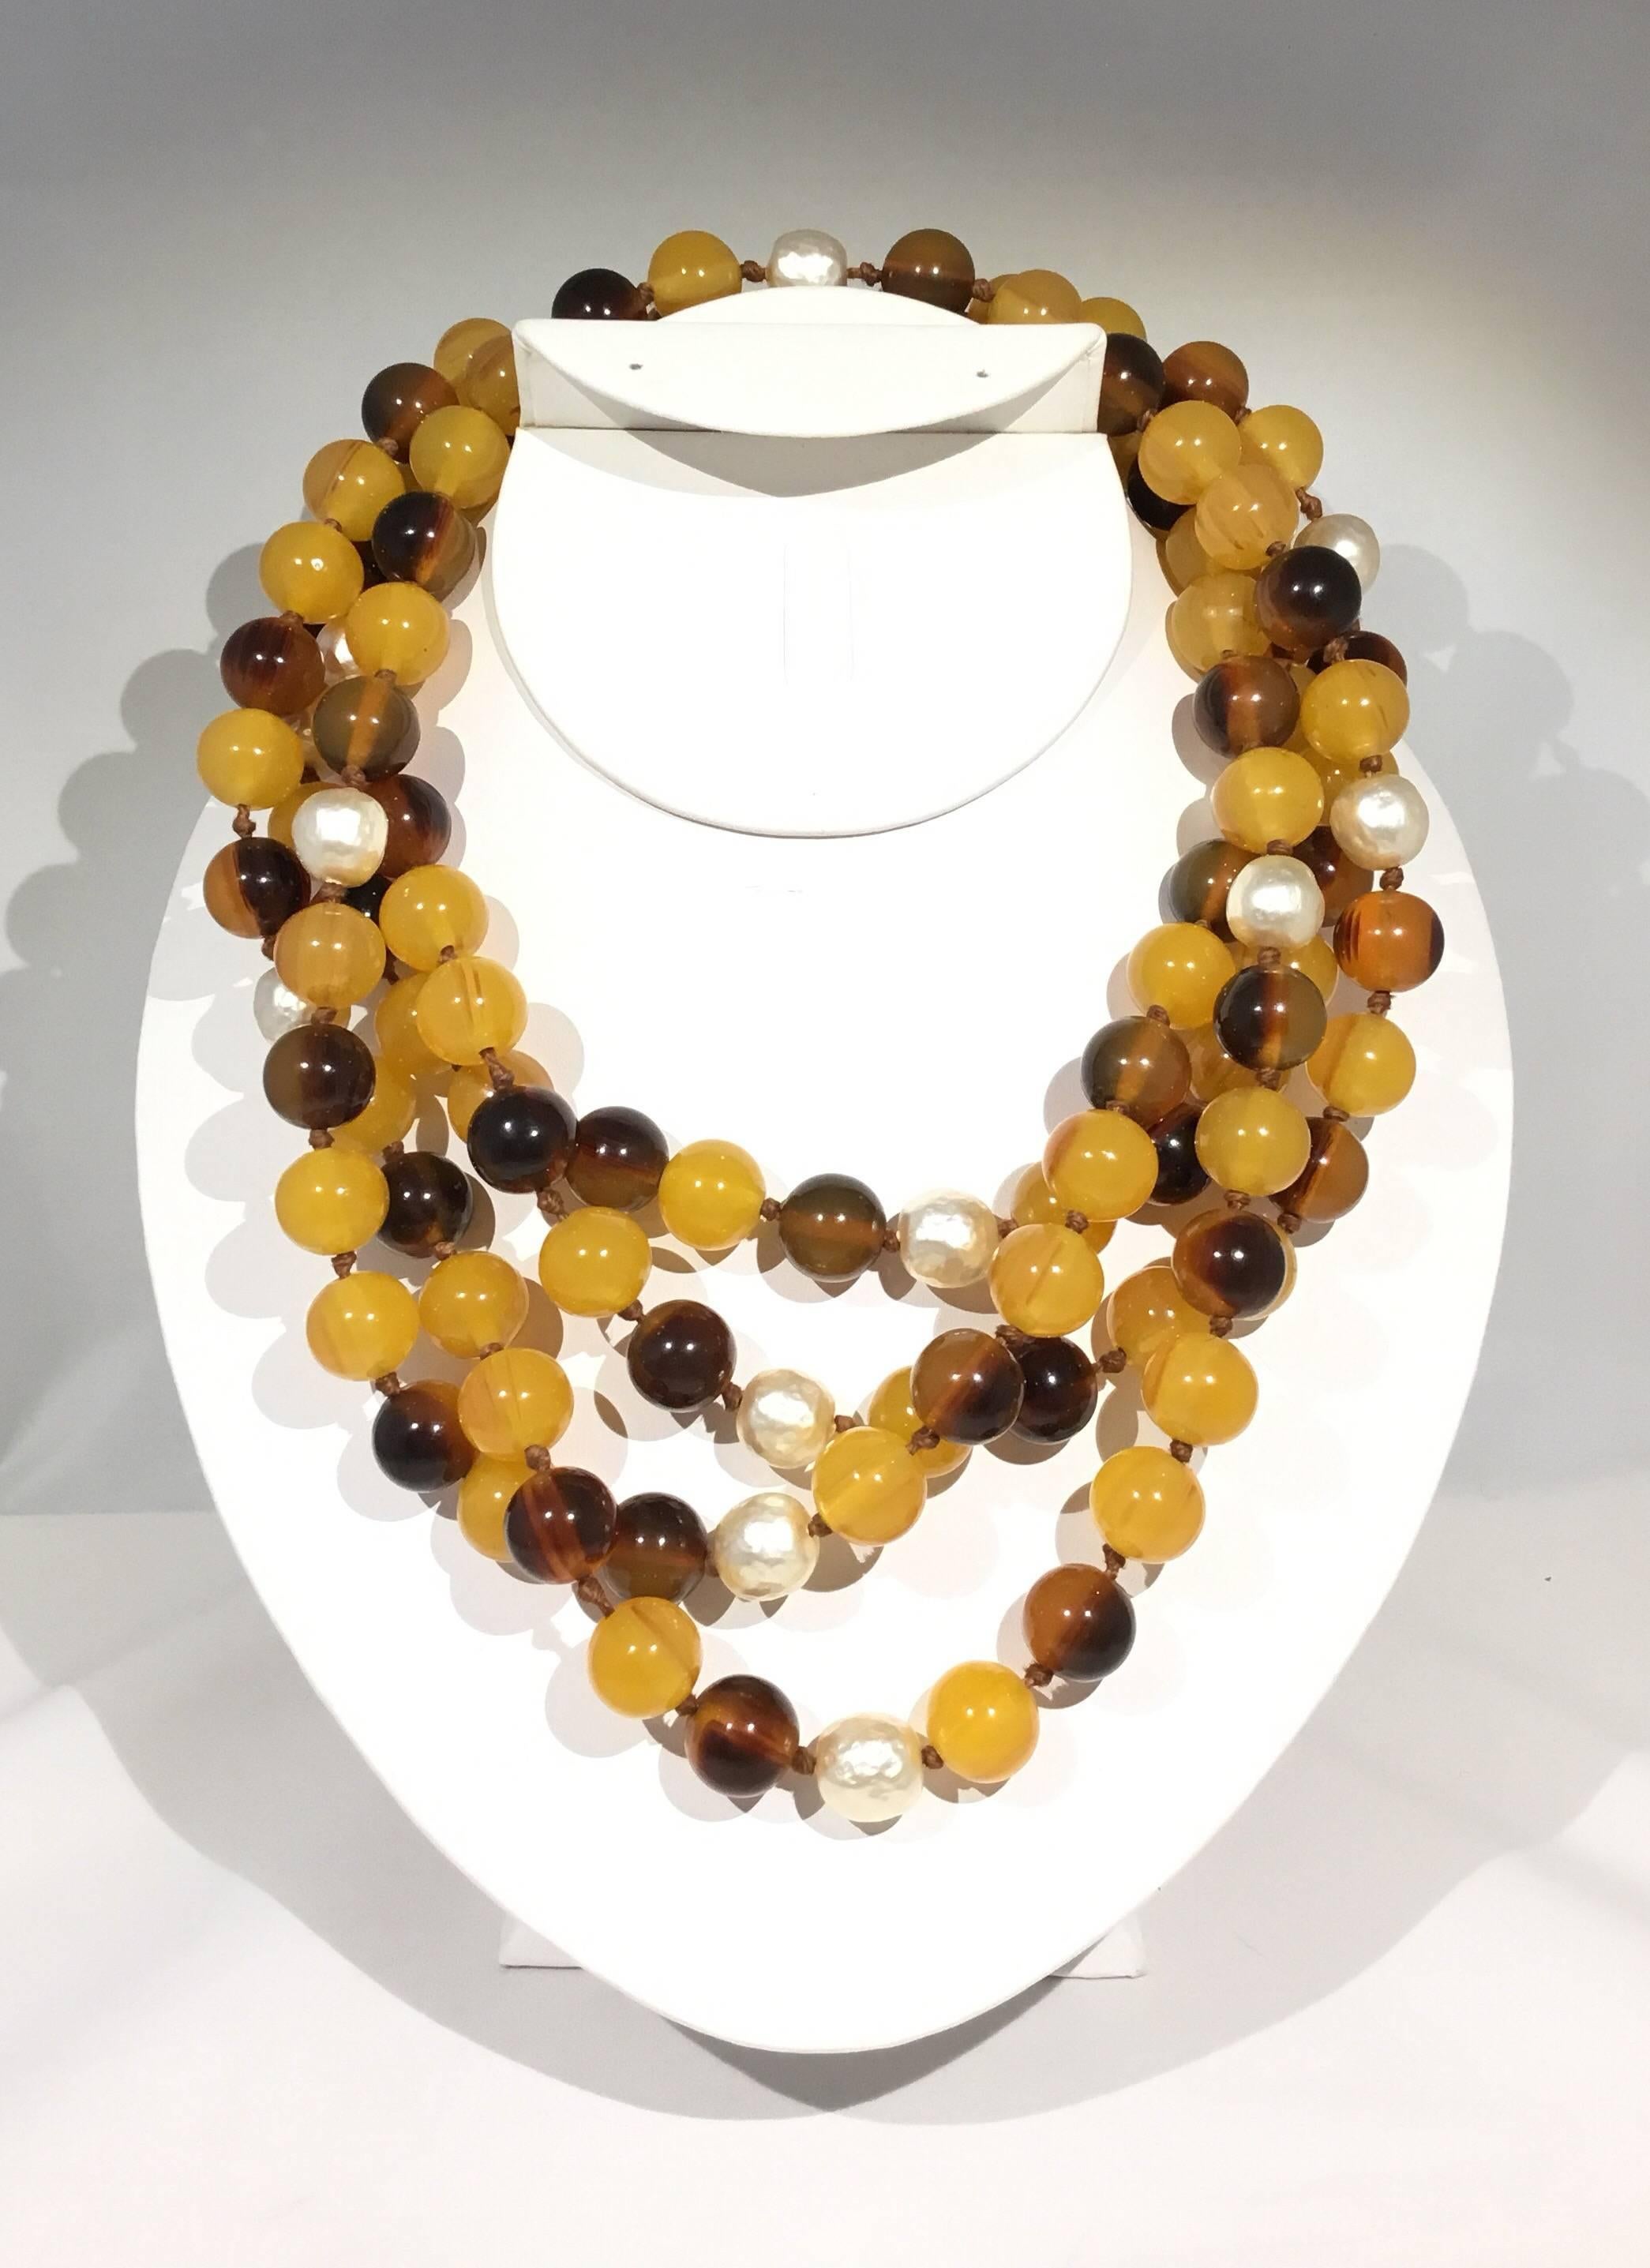 Bakelite and faux pearl necklace in variations of brown/tan on a knotted strand. Necklace has a clip clasp closure and is approximately 39 inches. Can be worn doubled or single strand.